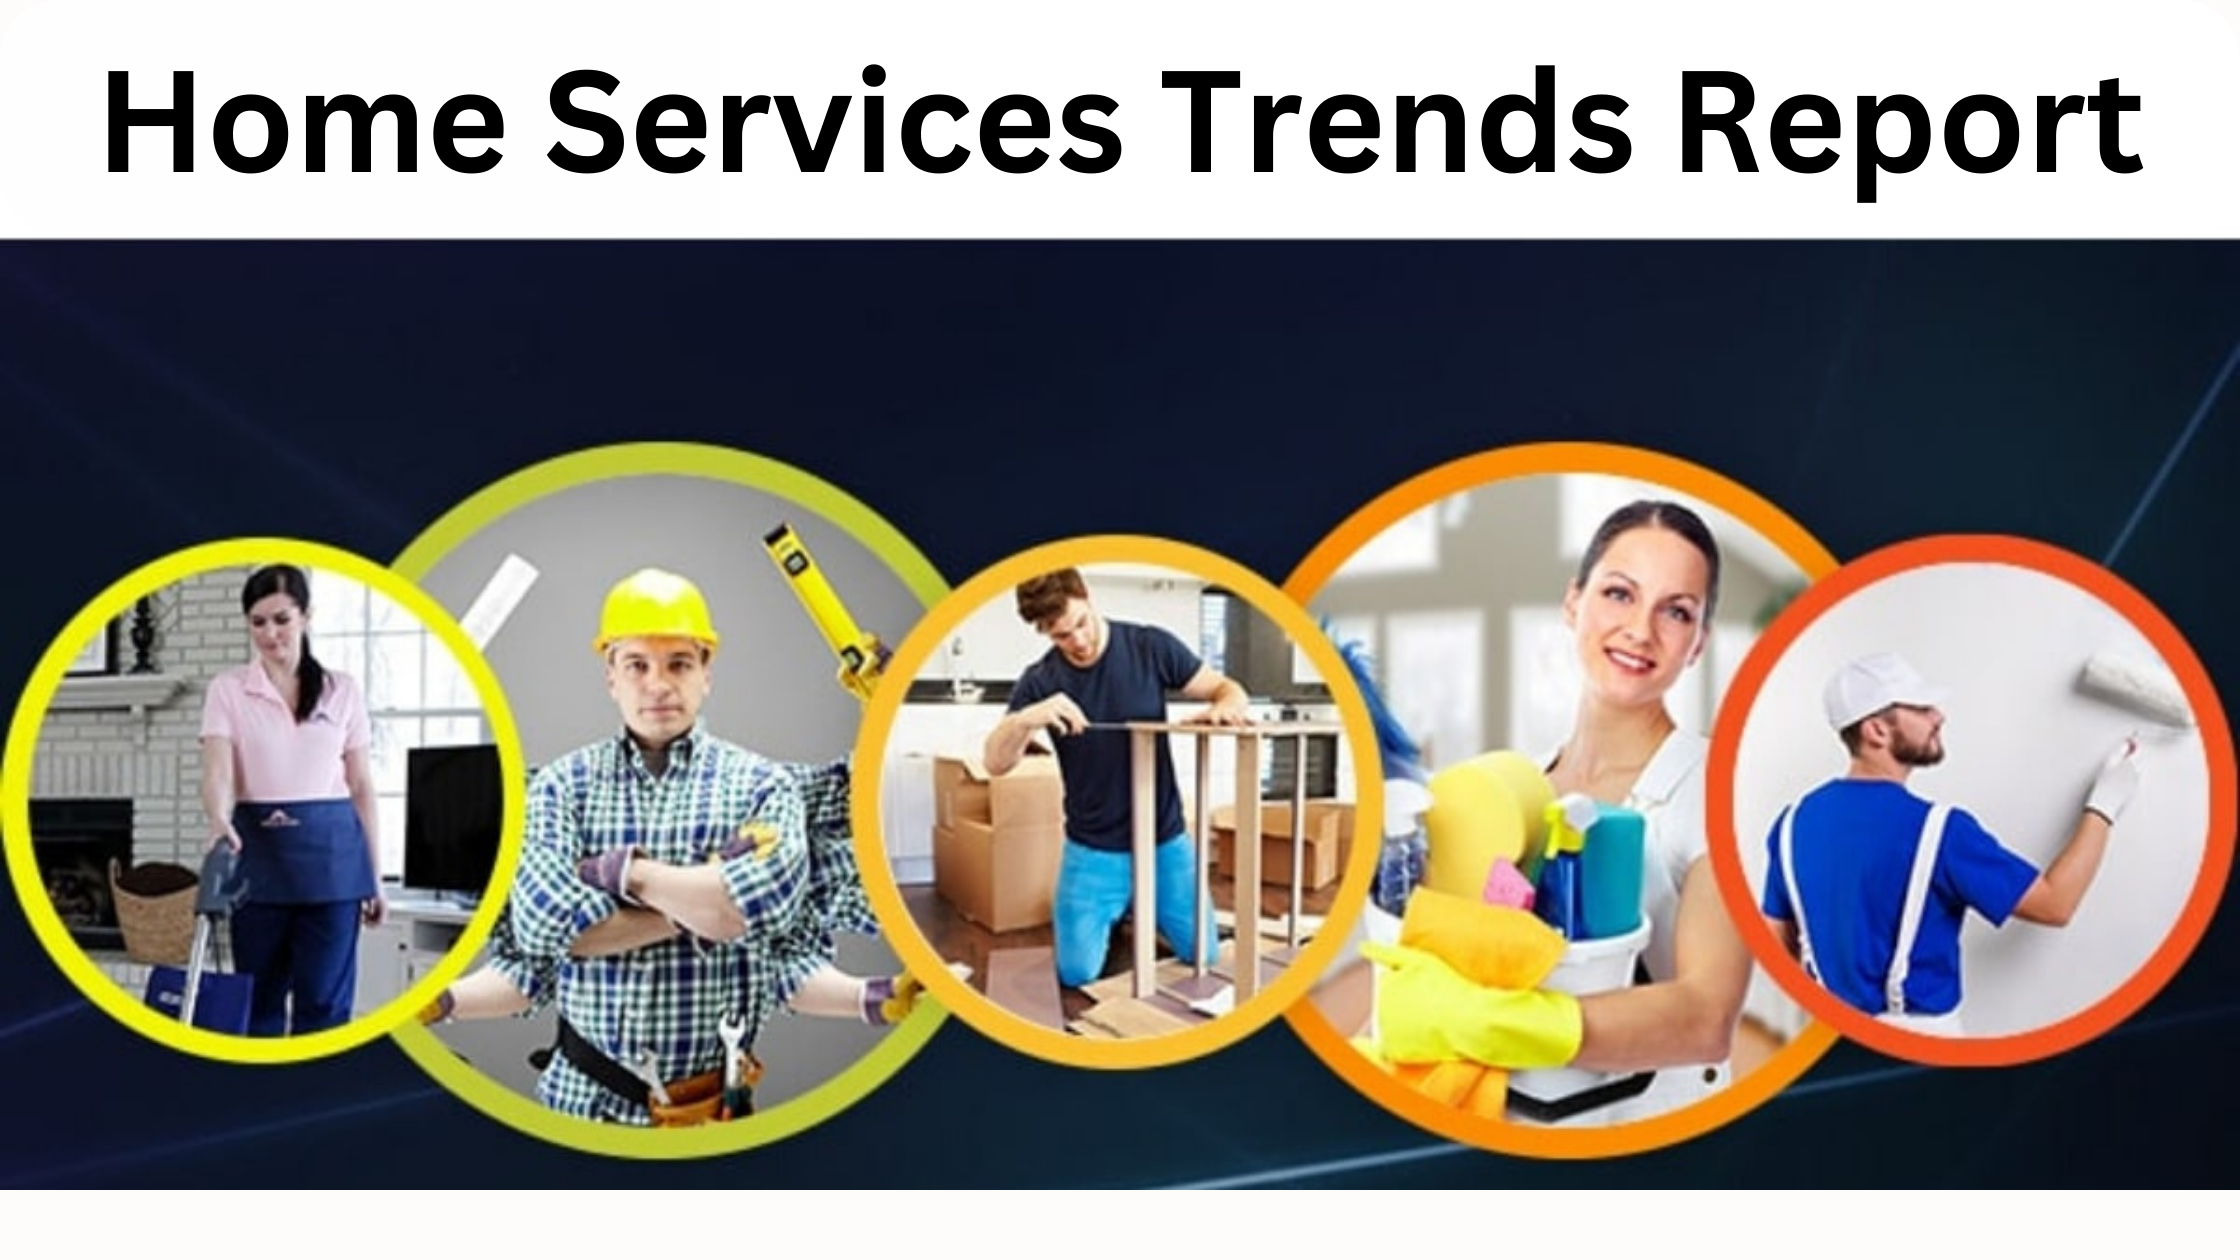 Home Services Trends